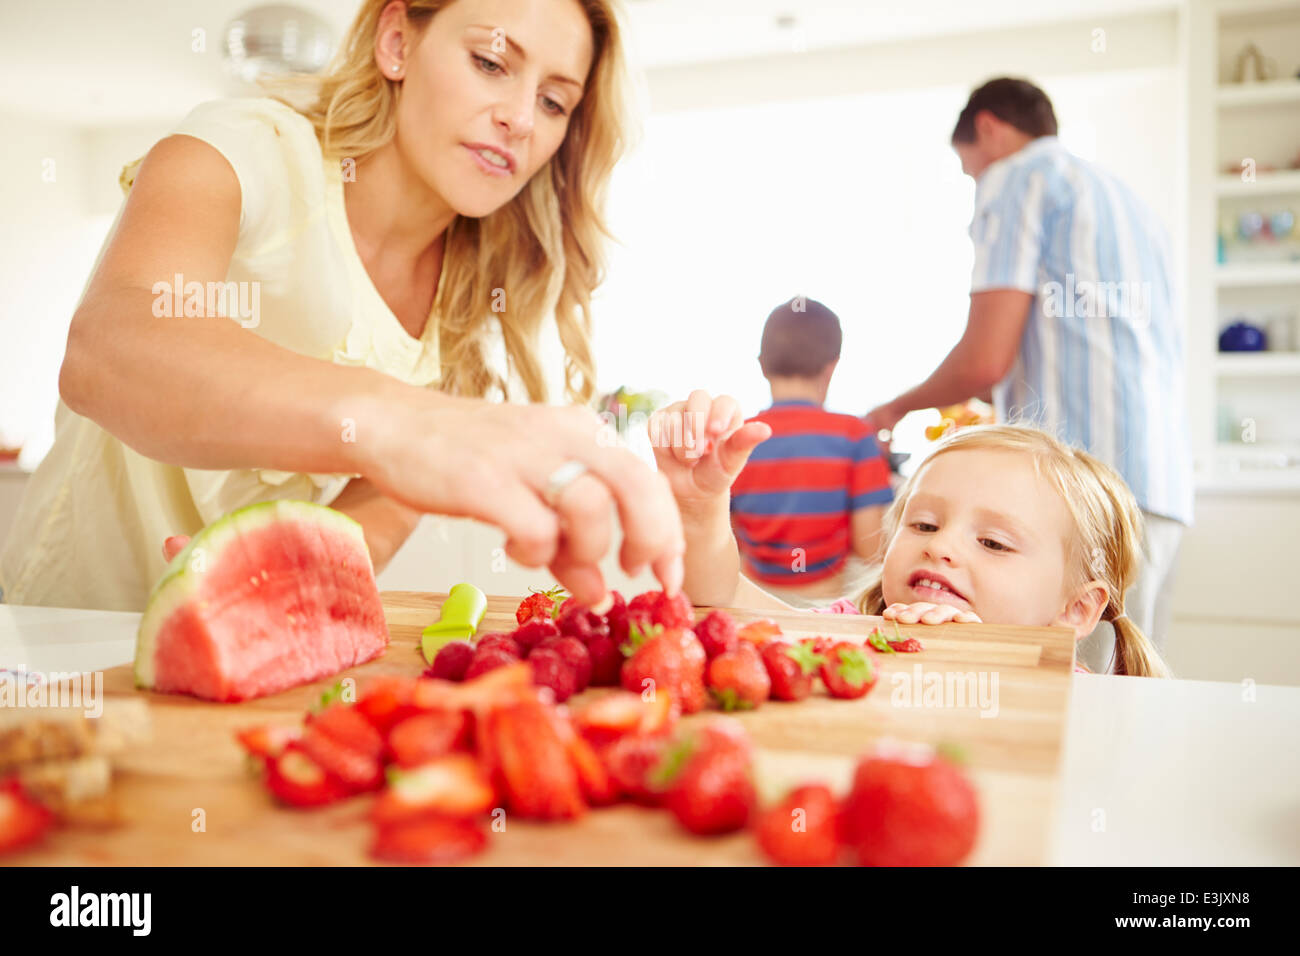 Daughter Helping Mother To Prepare Family Breakfast Stock Photo